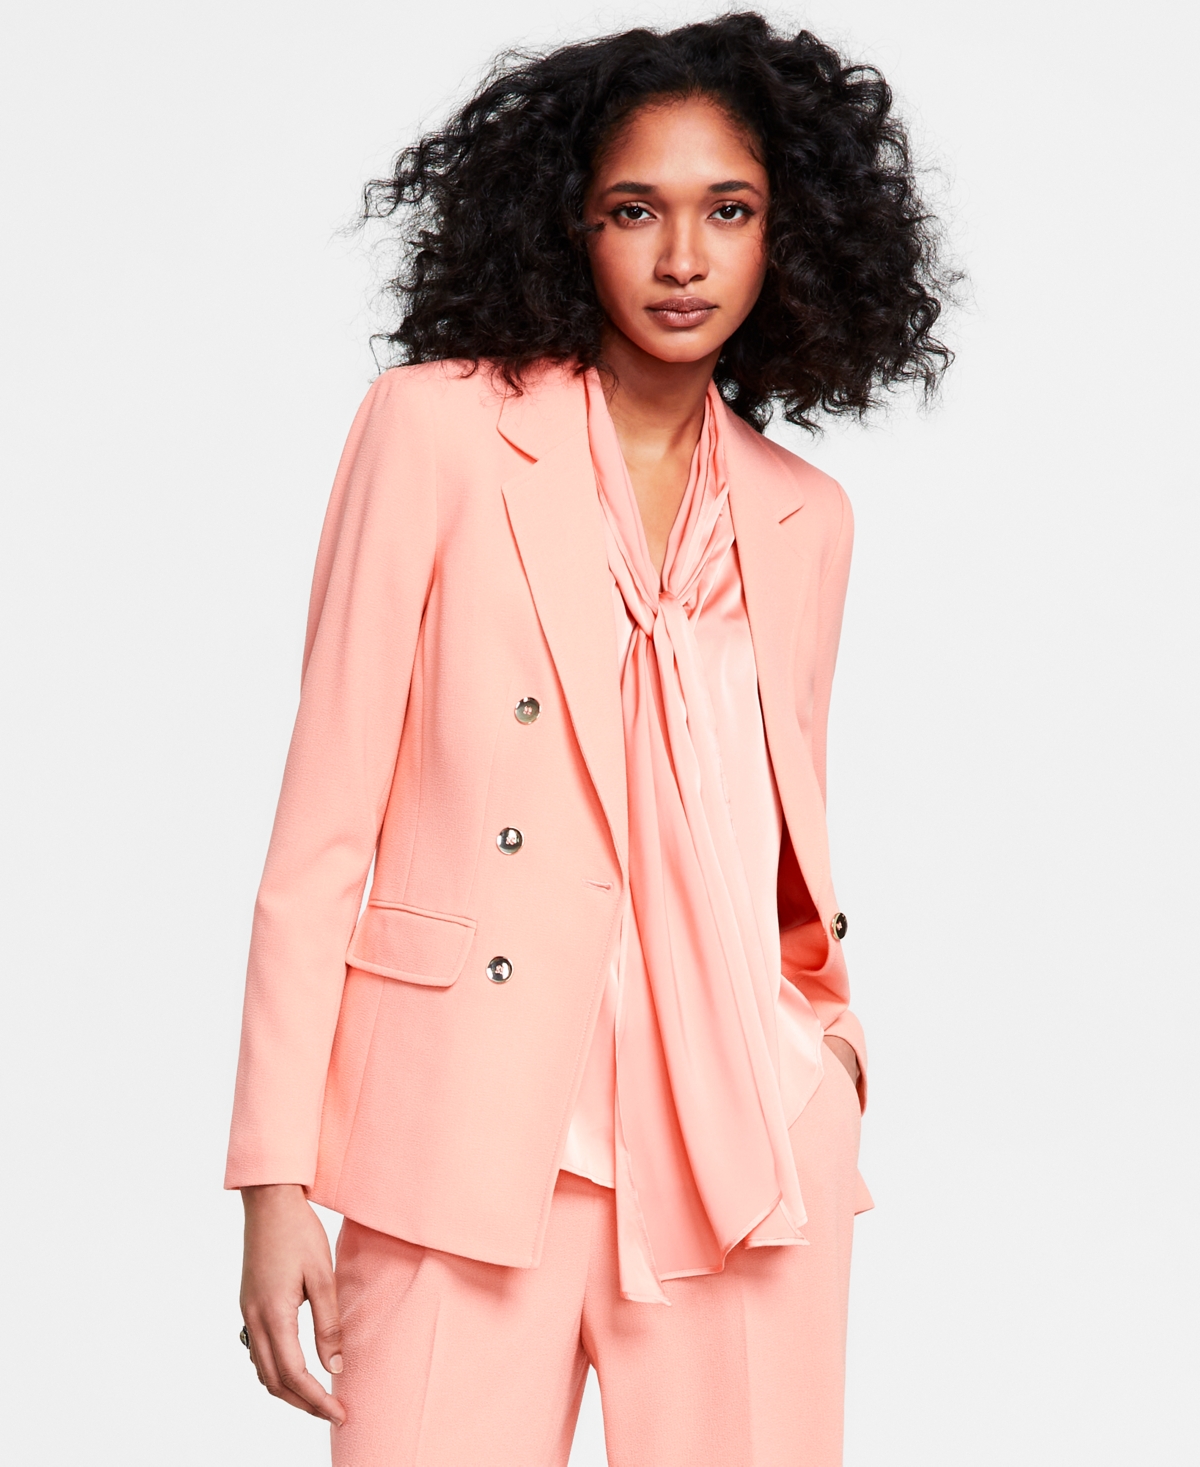 Bar Iii Women's Textured-Crepe Button-Front Blazer, Created for Macy's